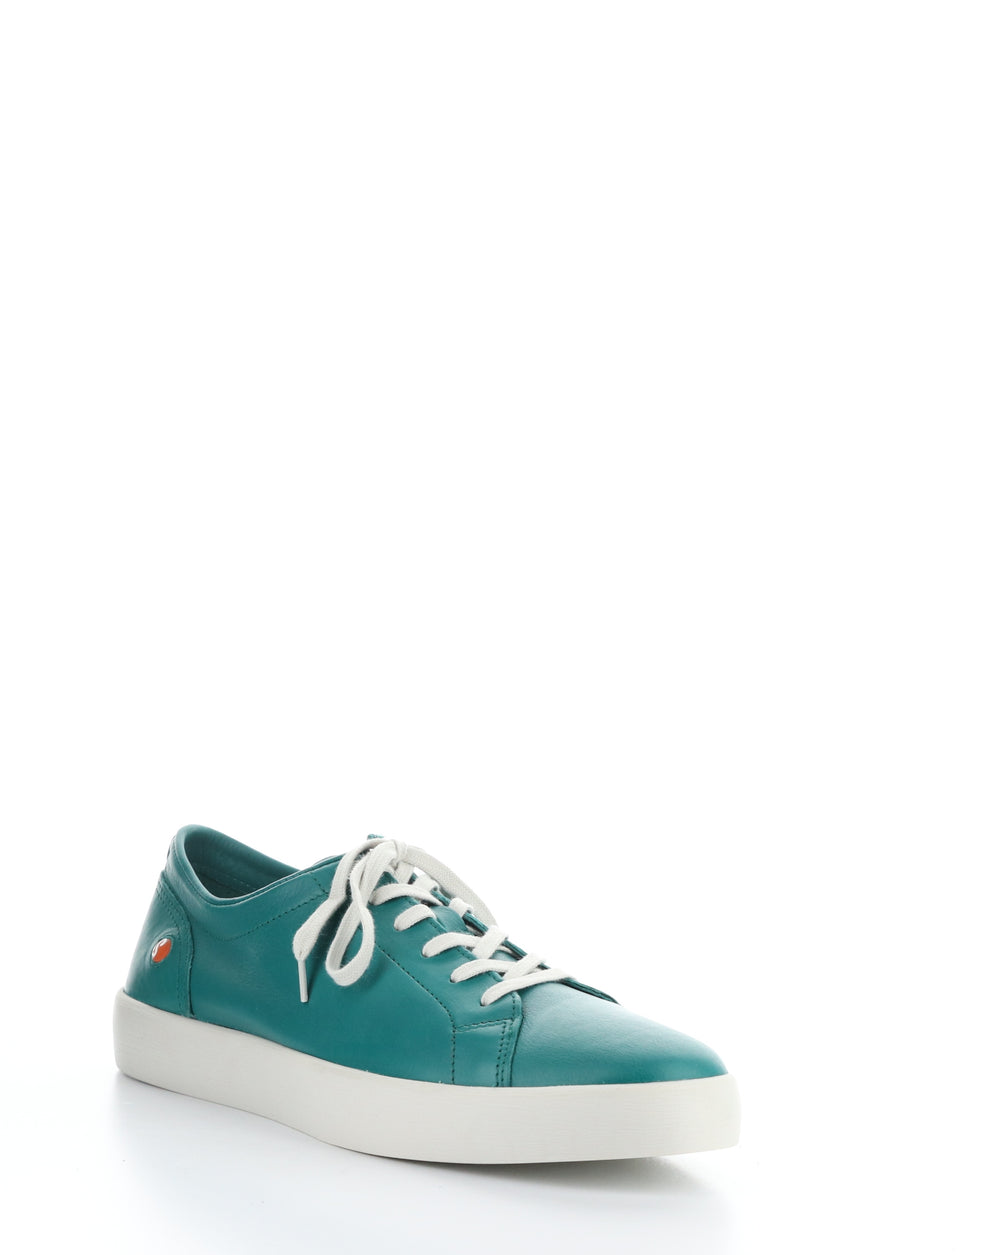 ROSS594SOF 016 PETROL Lace-up Shoes